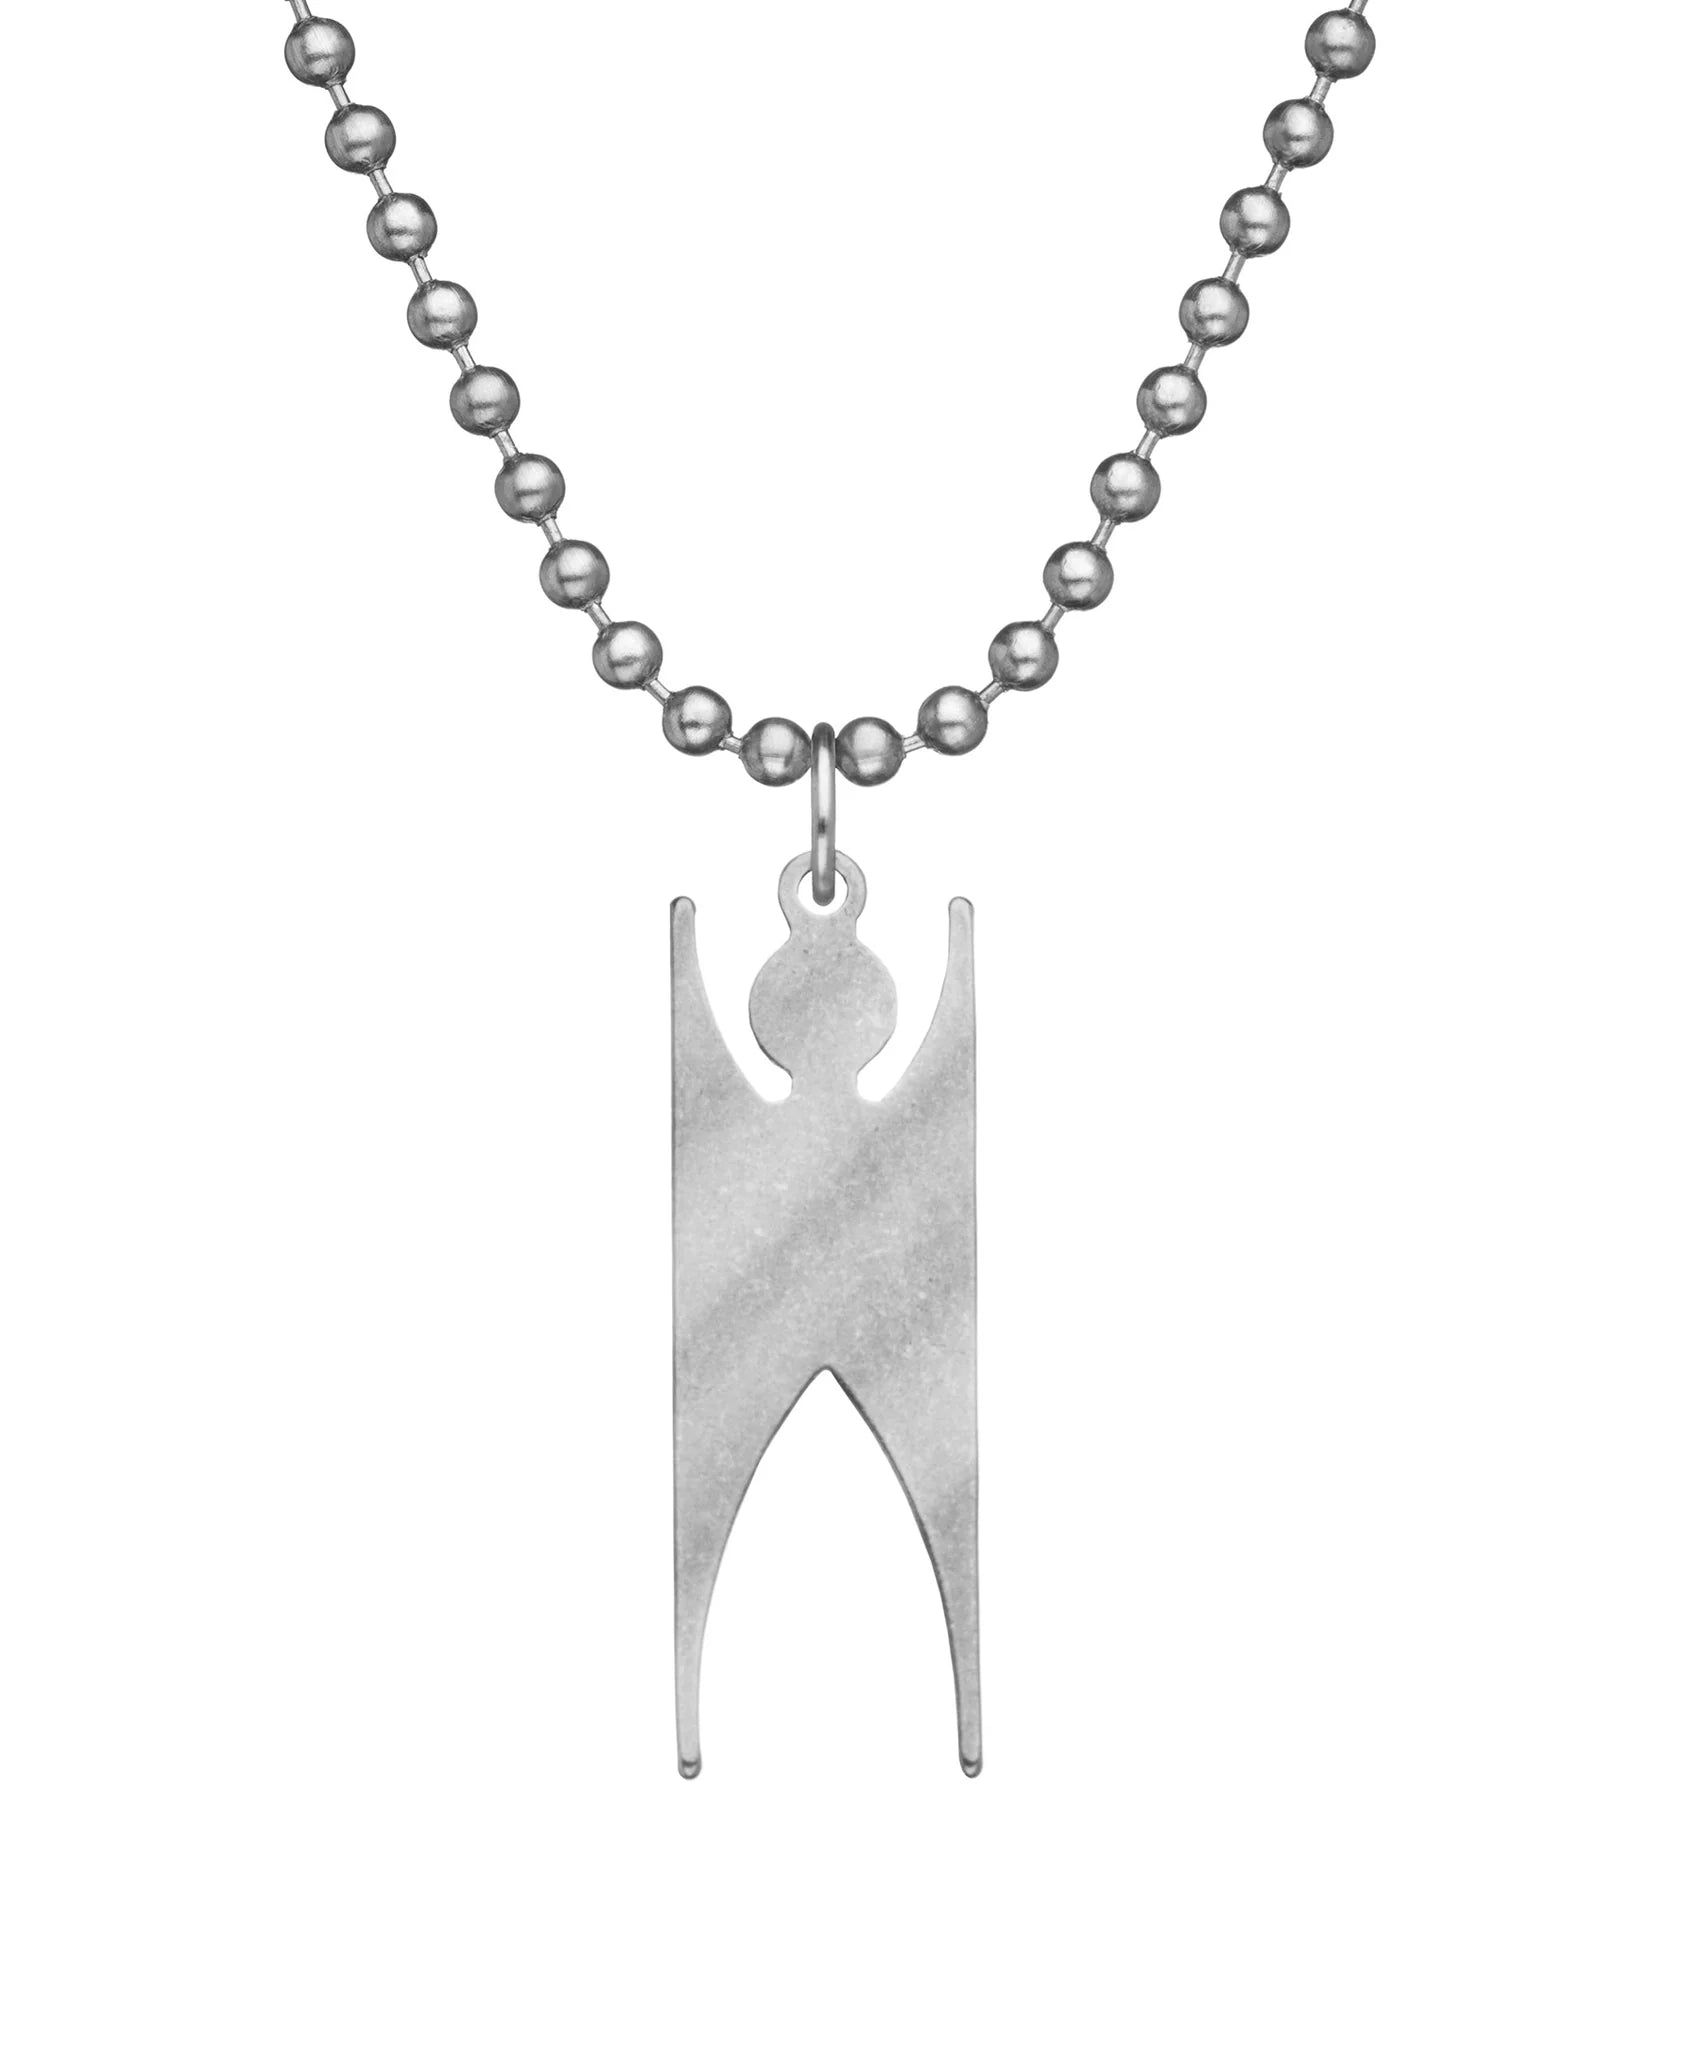 Humanist Necklace with Dog Tag Chain - Dutch Defense Issue